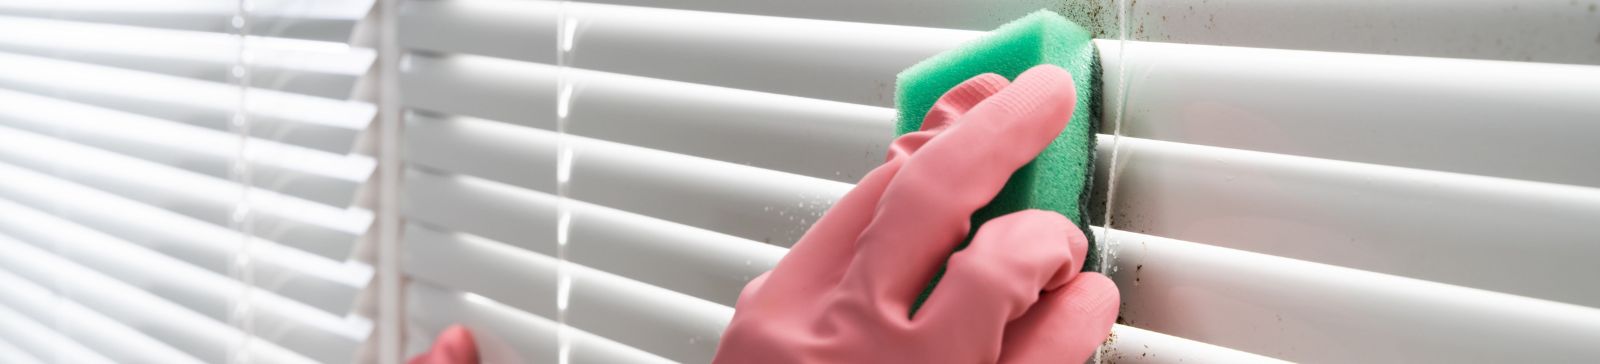 How to clean blinds and other window coverings?